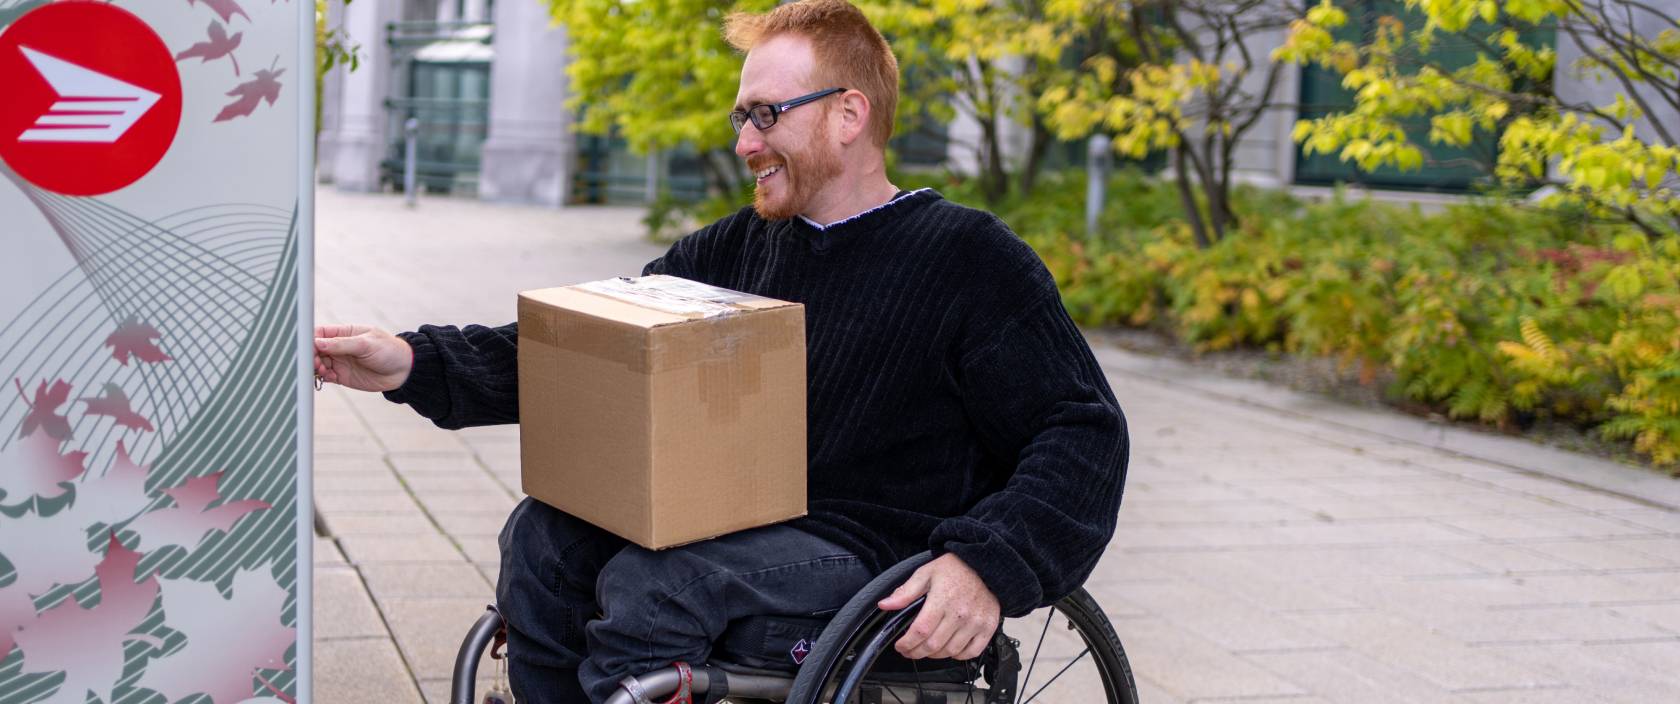 A man in a wheelchair takes a package from a Canada Post community mailbox.